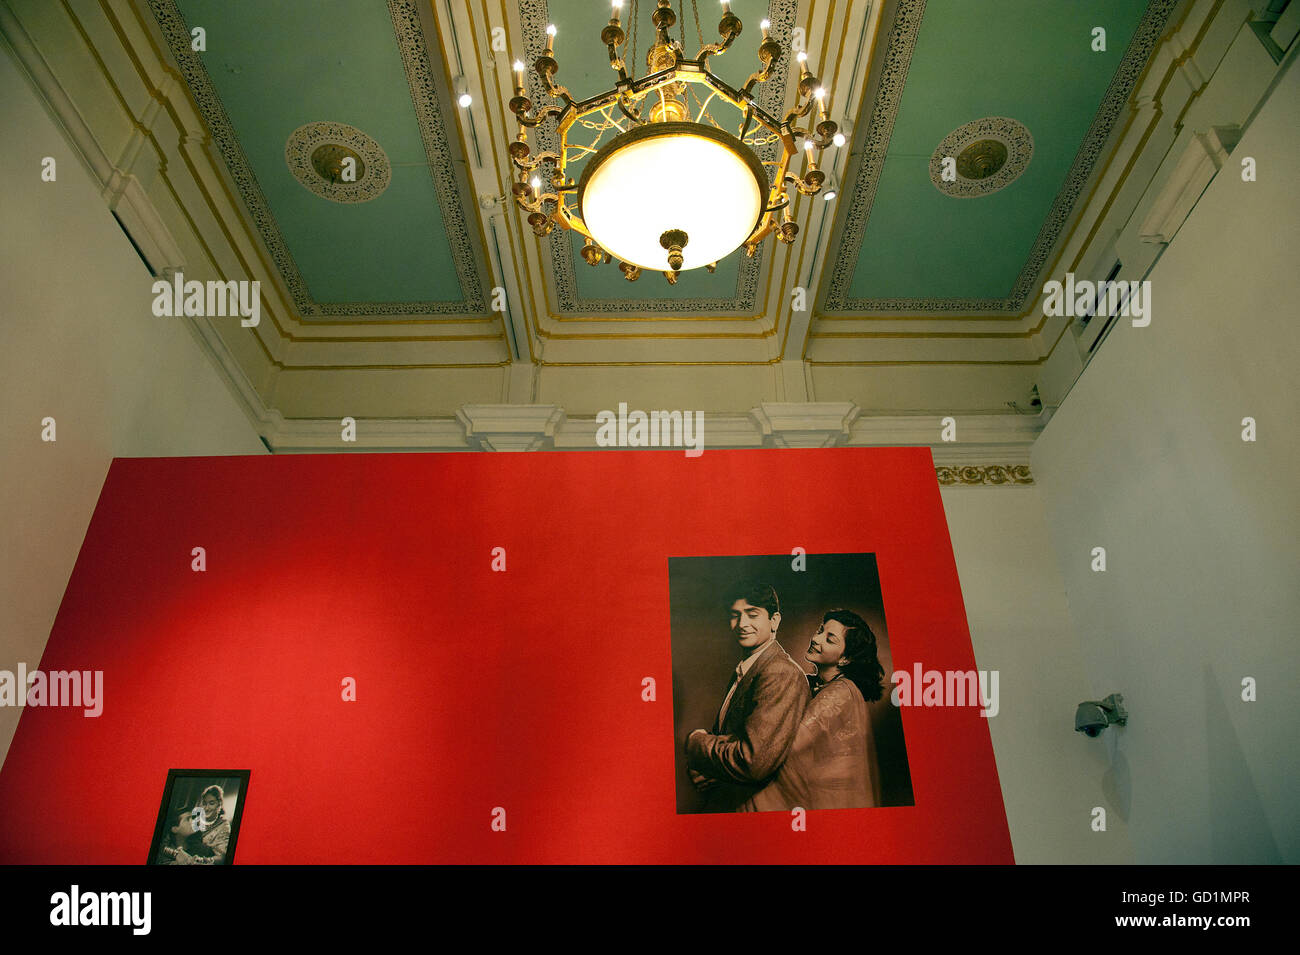 The image of Bollywood actros Raj kapoor and Nargis Portrait in Galley of BDL Musuem, Mumbai, India Stock Photo